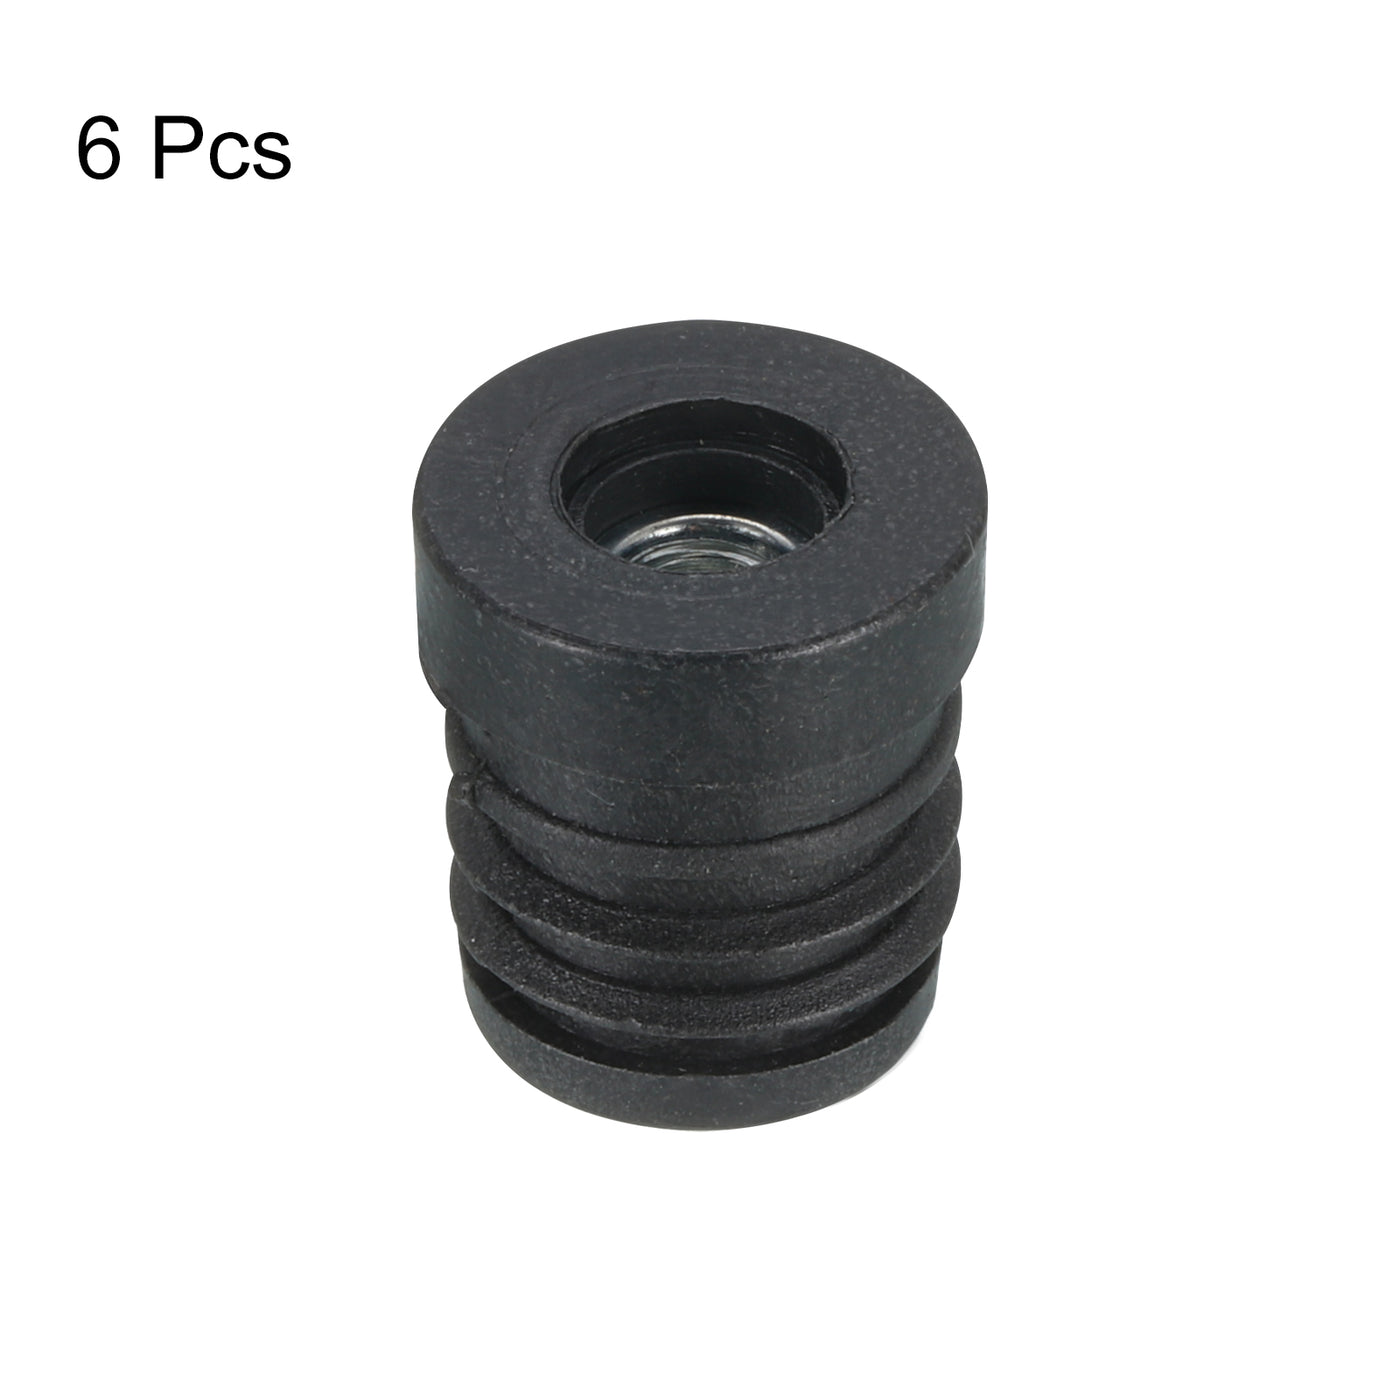 uxcell Uxcell 6Pcs Caster Insert with Thread, 19mm/0.75" M6 Thread for Furniture